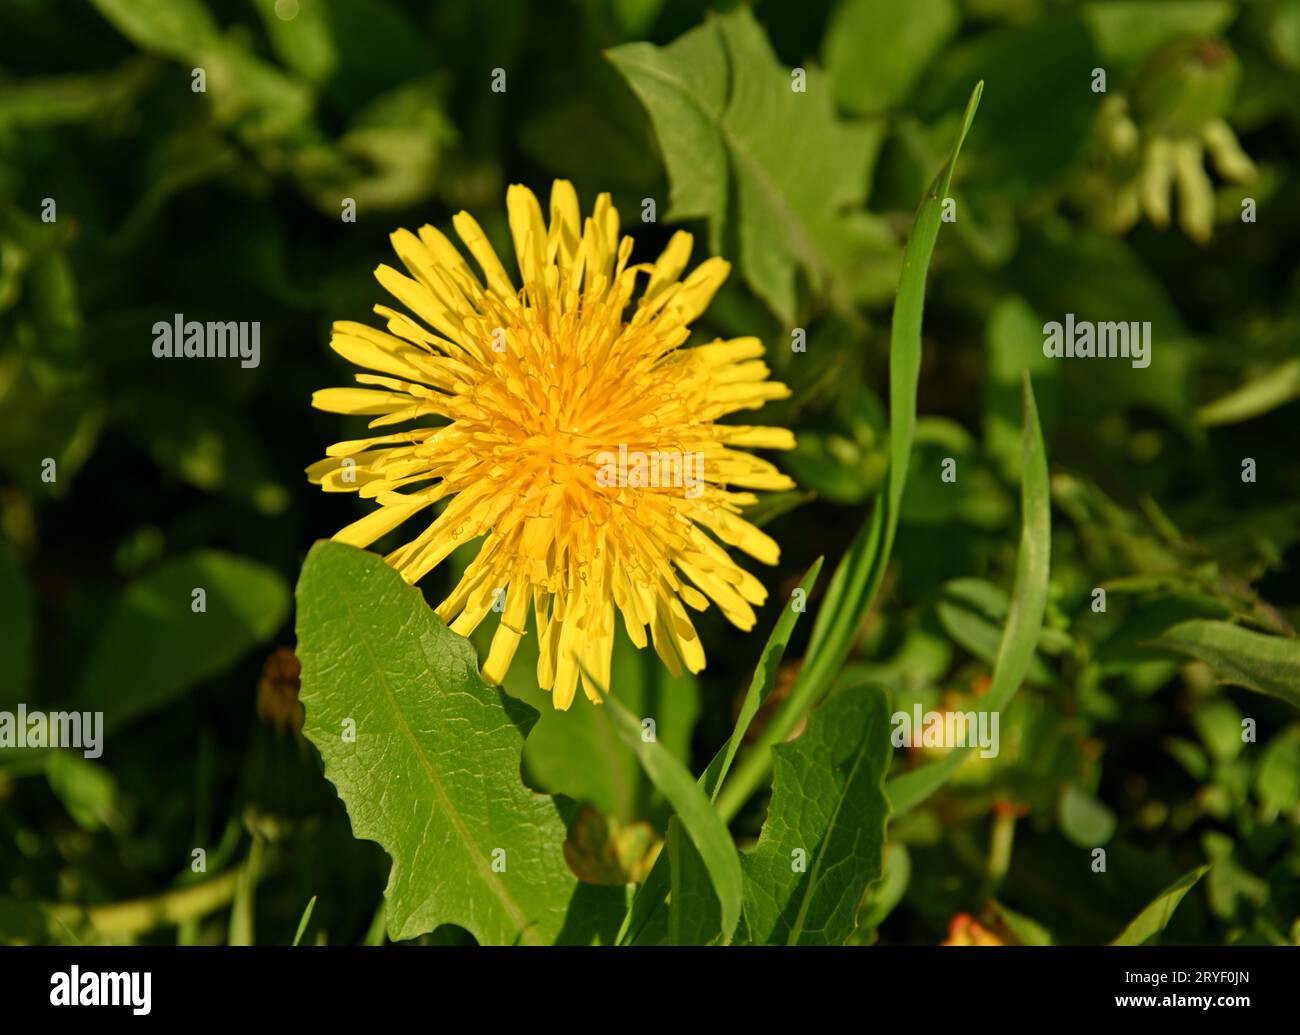 Close up yellow dandelion flower in green grass Stock Photo